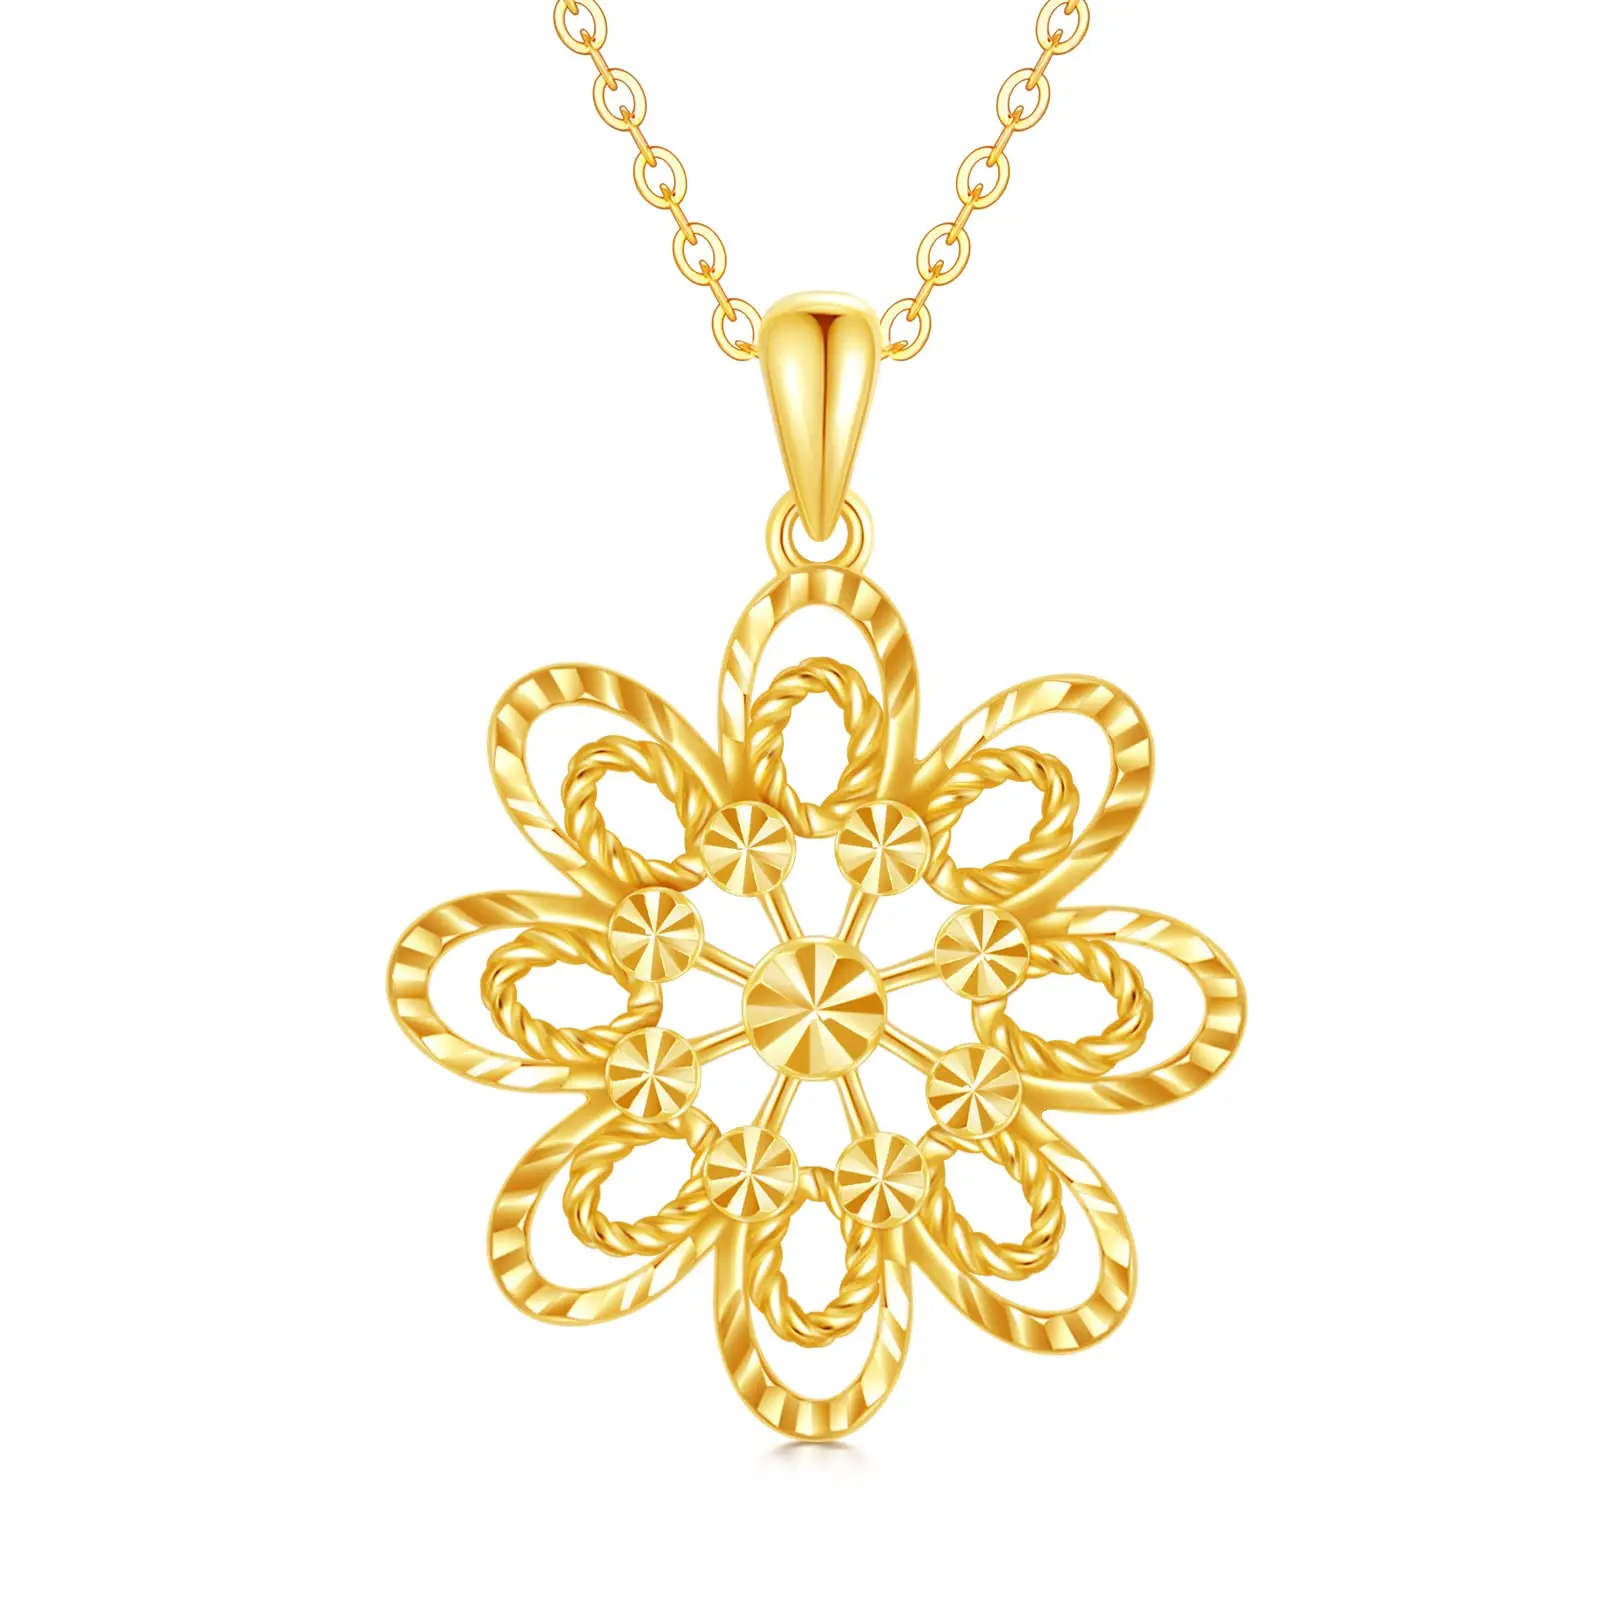 YFN 14K Real Gold Flower Pendant Necklace for Women Yellow Gold Diamond-Cut Necklace Anniversary Birthday Gifts